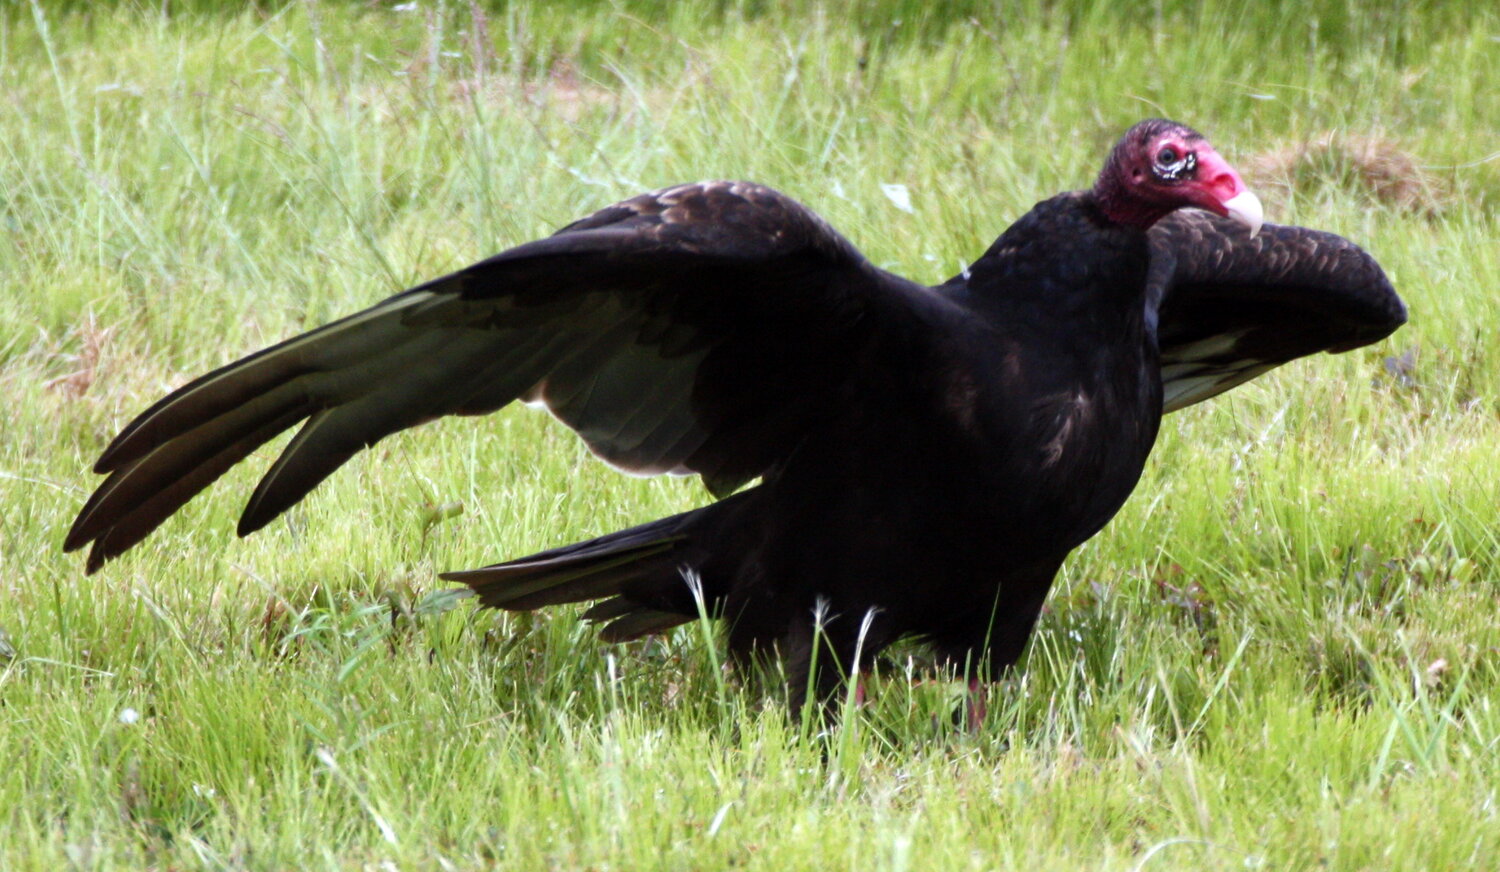 Vultures on the Rise in your Neighborhood? No Need to Move Out